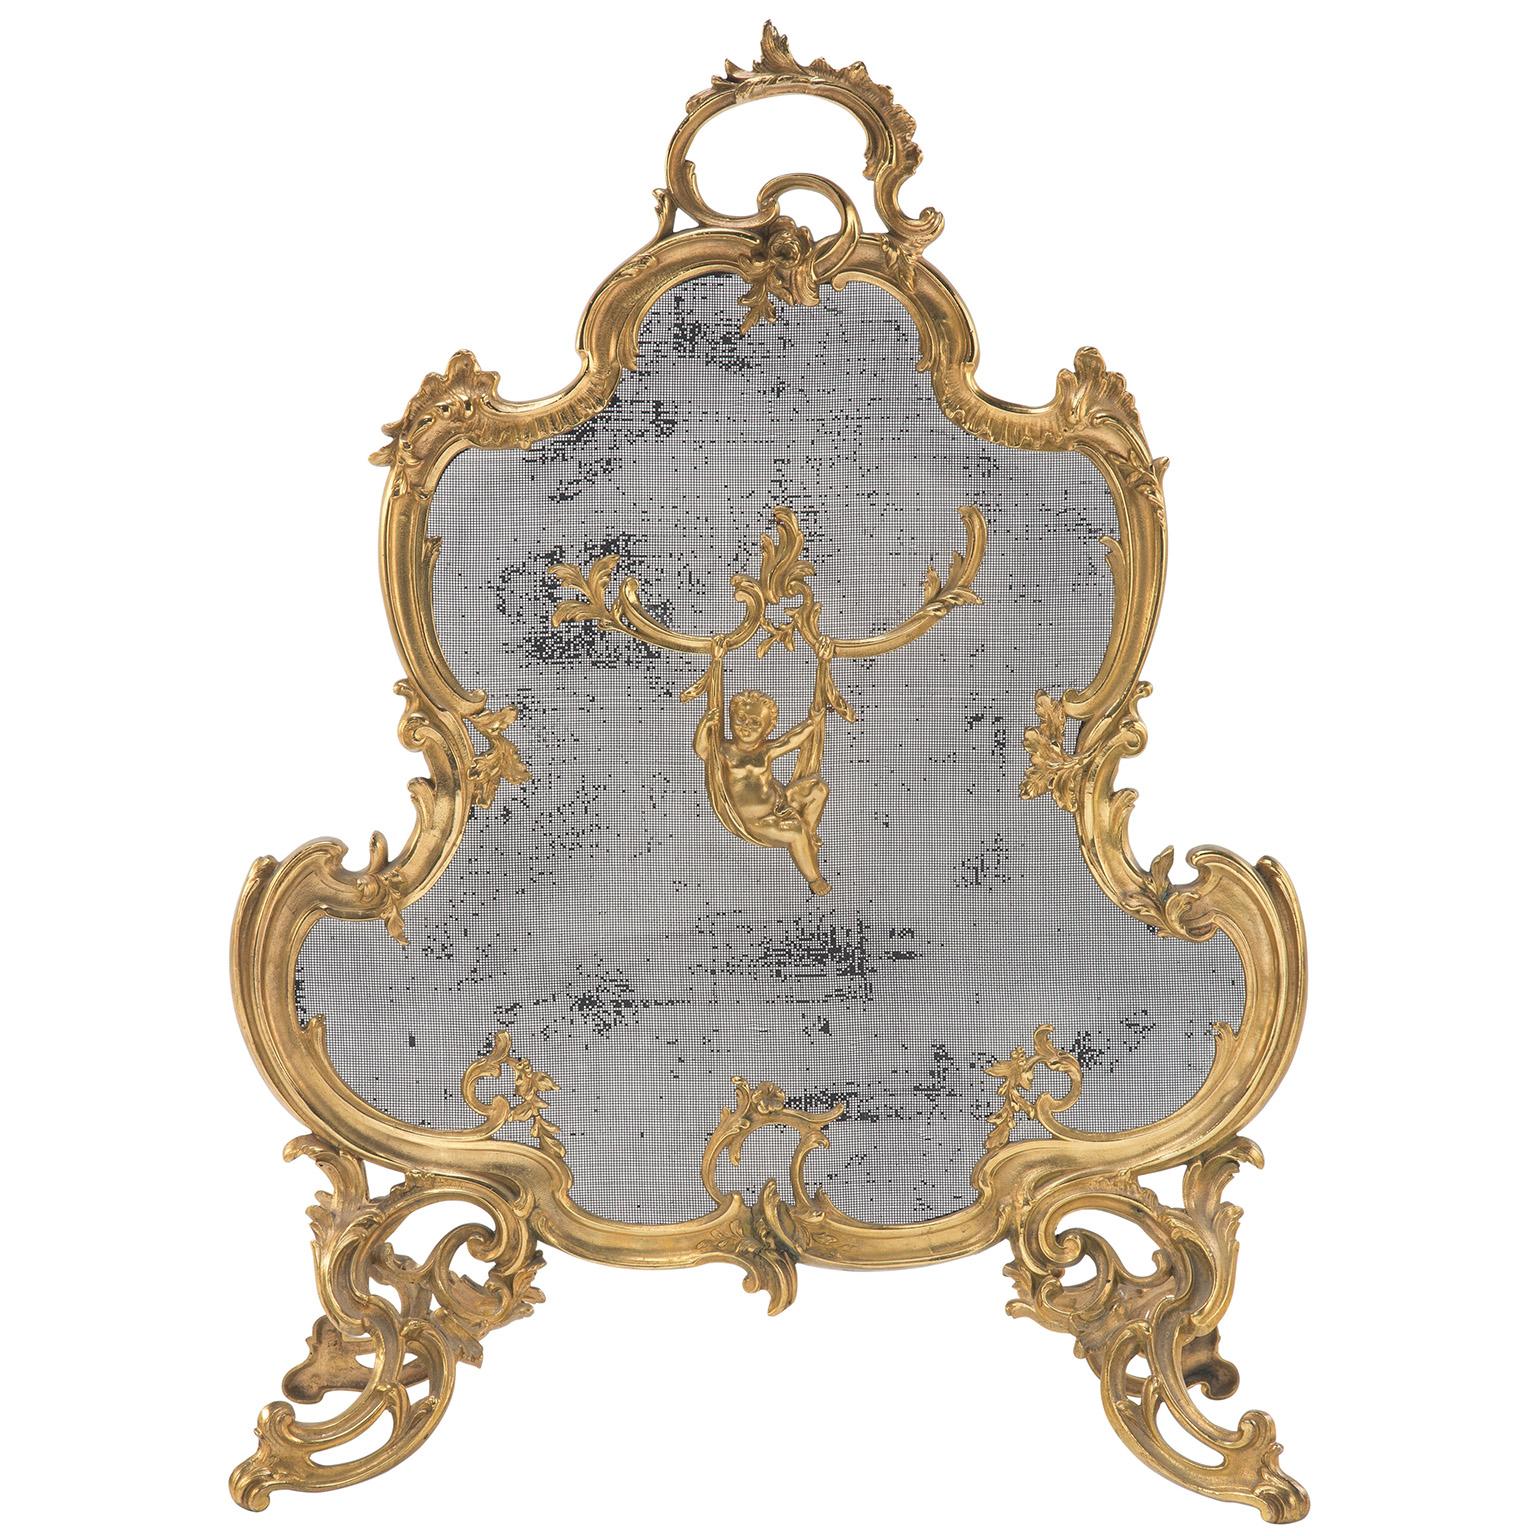 A fine French 19th/20th century Louis XV style gilt-bronze figural fireplace screen. The whimsical ornate ormolu frame with scrolled and rounded corners, detailed with flowers and acanthus and centered with a figure of a Putto suspended from a